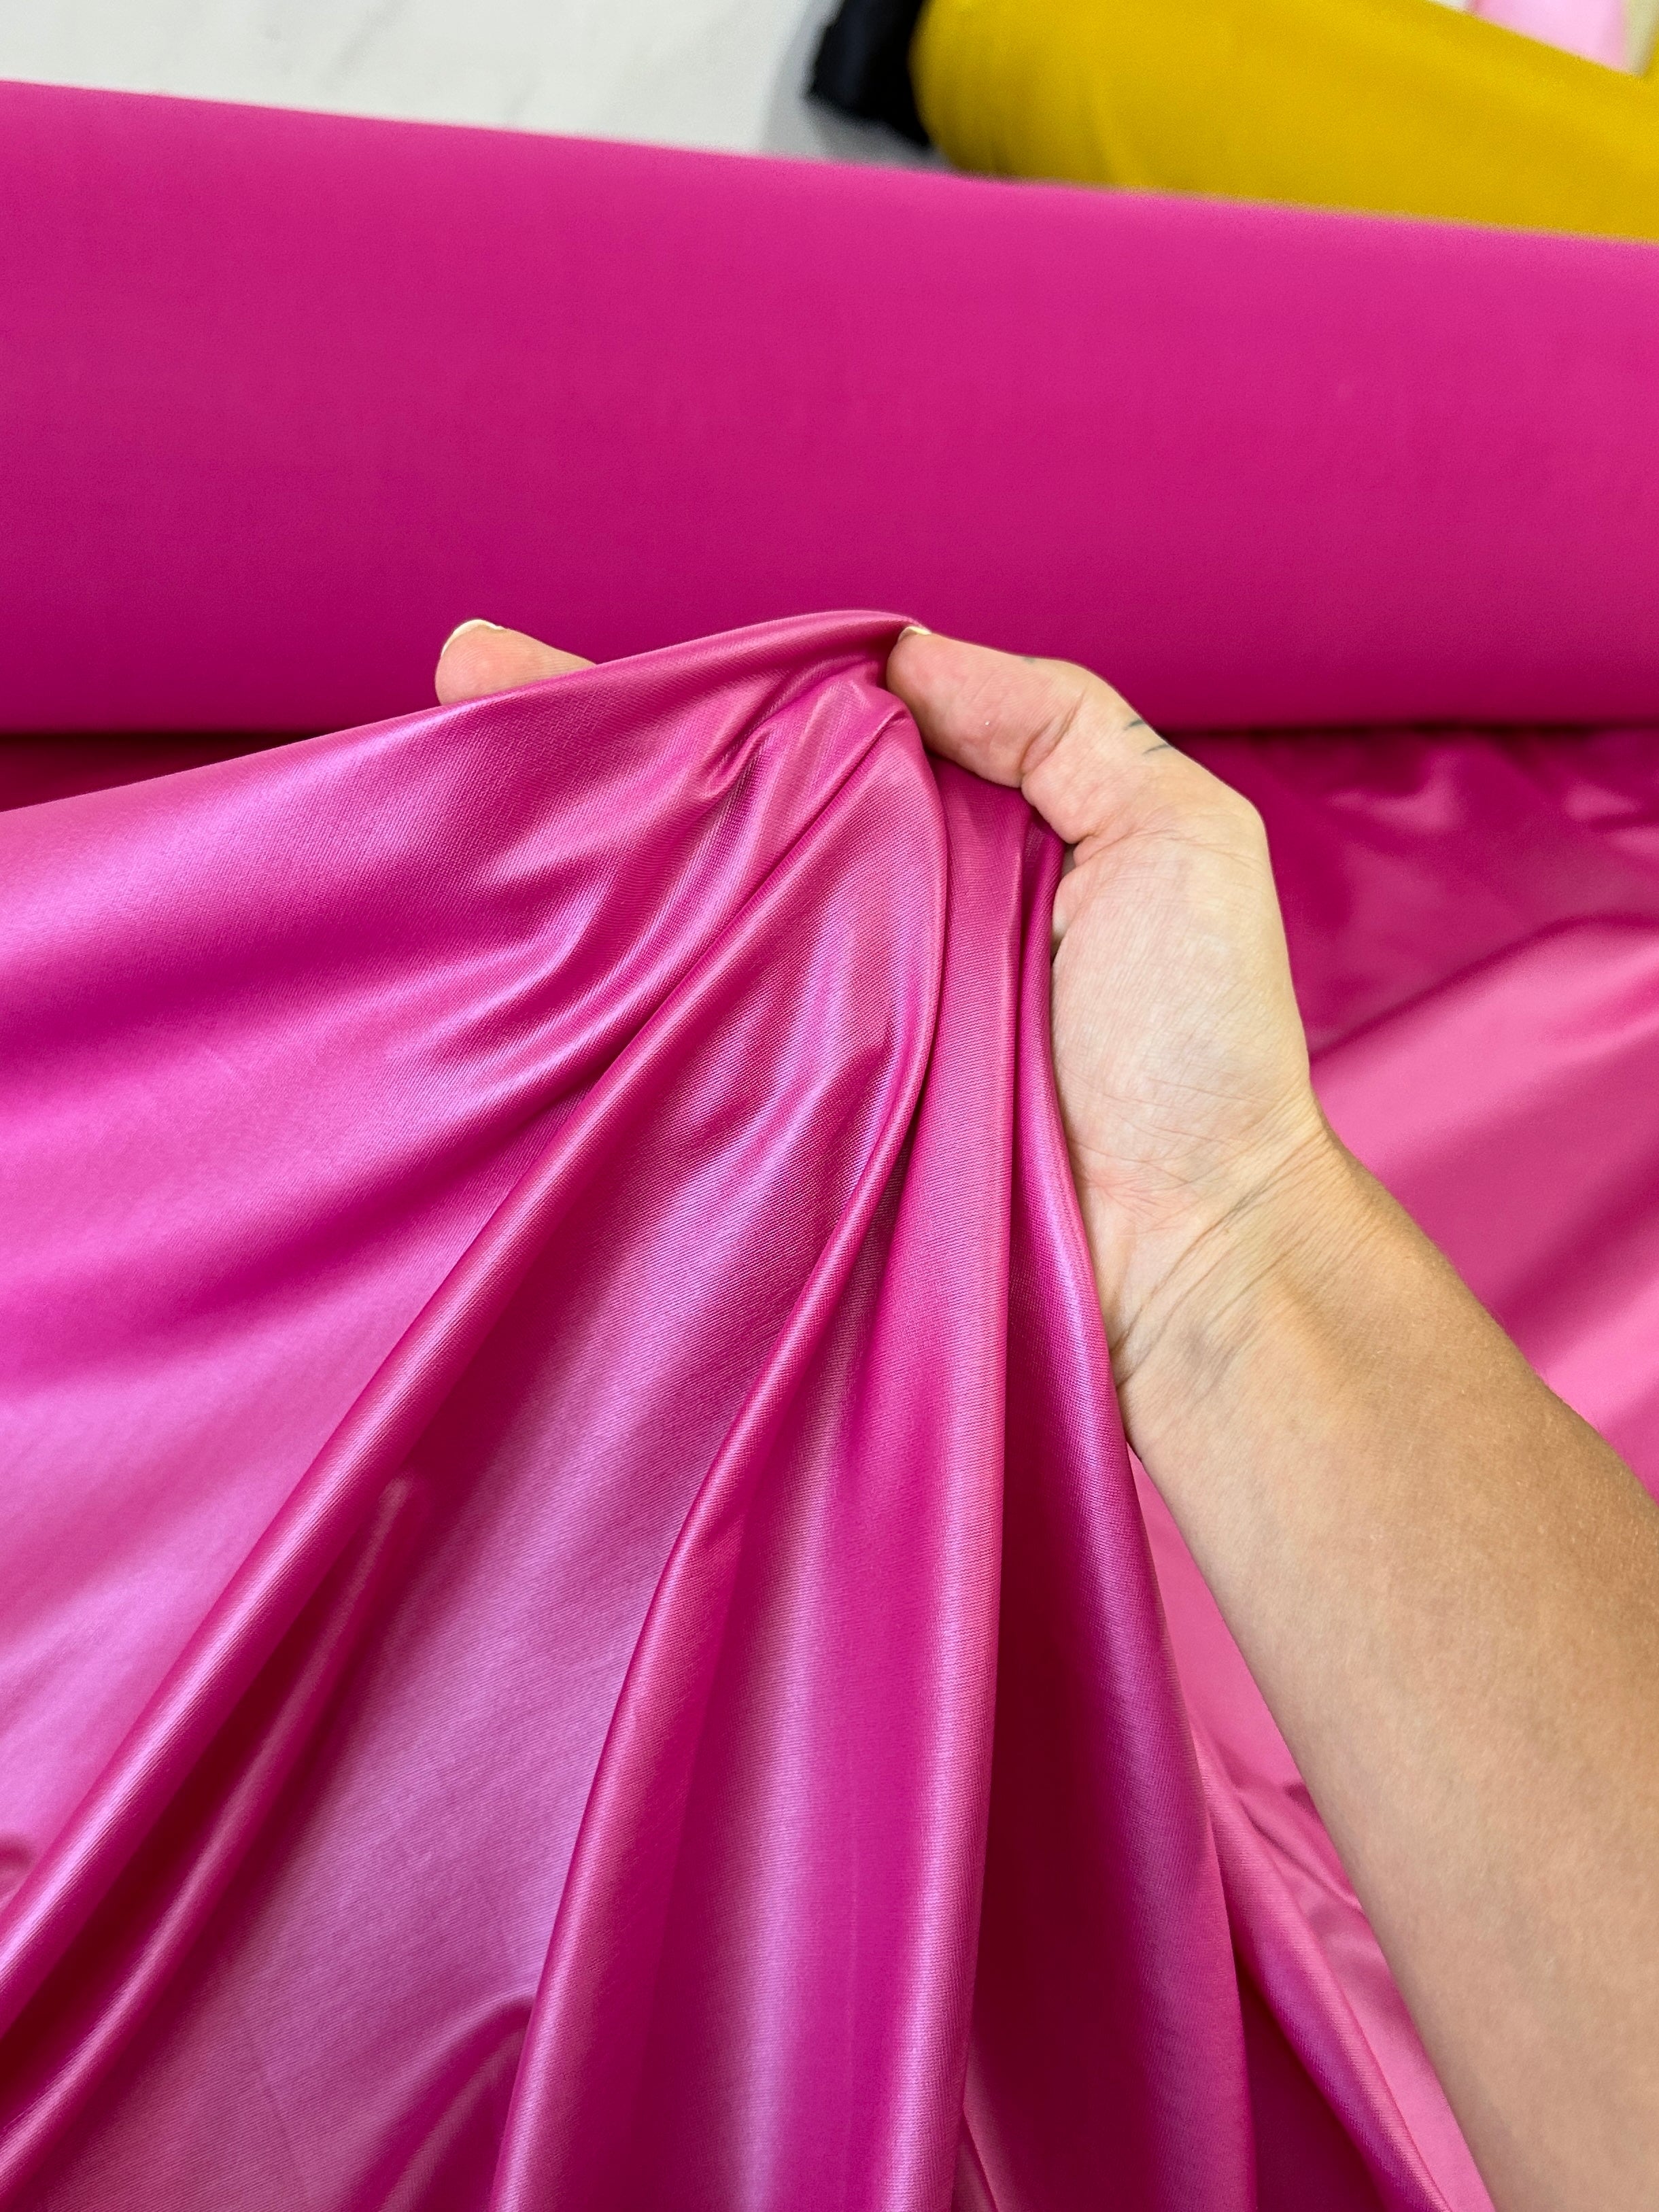 hot pink all way Stretch Faux Leather, pink all way stretch leather, shiny faux leather, light pink all way stretch faux leather for woman, faux leather for costumes, faux leather for home decor, 2 way stretch faux leather, leather for blazers, cheap leather, discounted leather, leather on sale